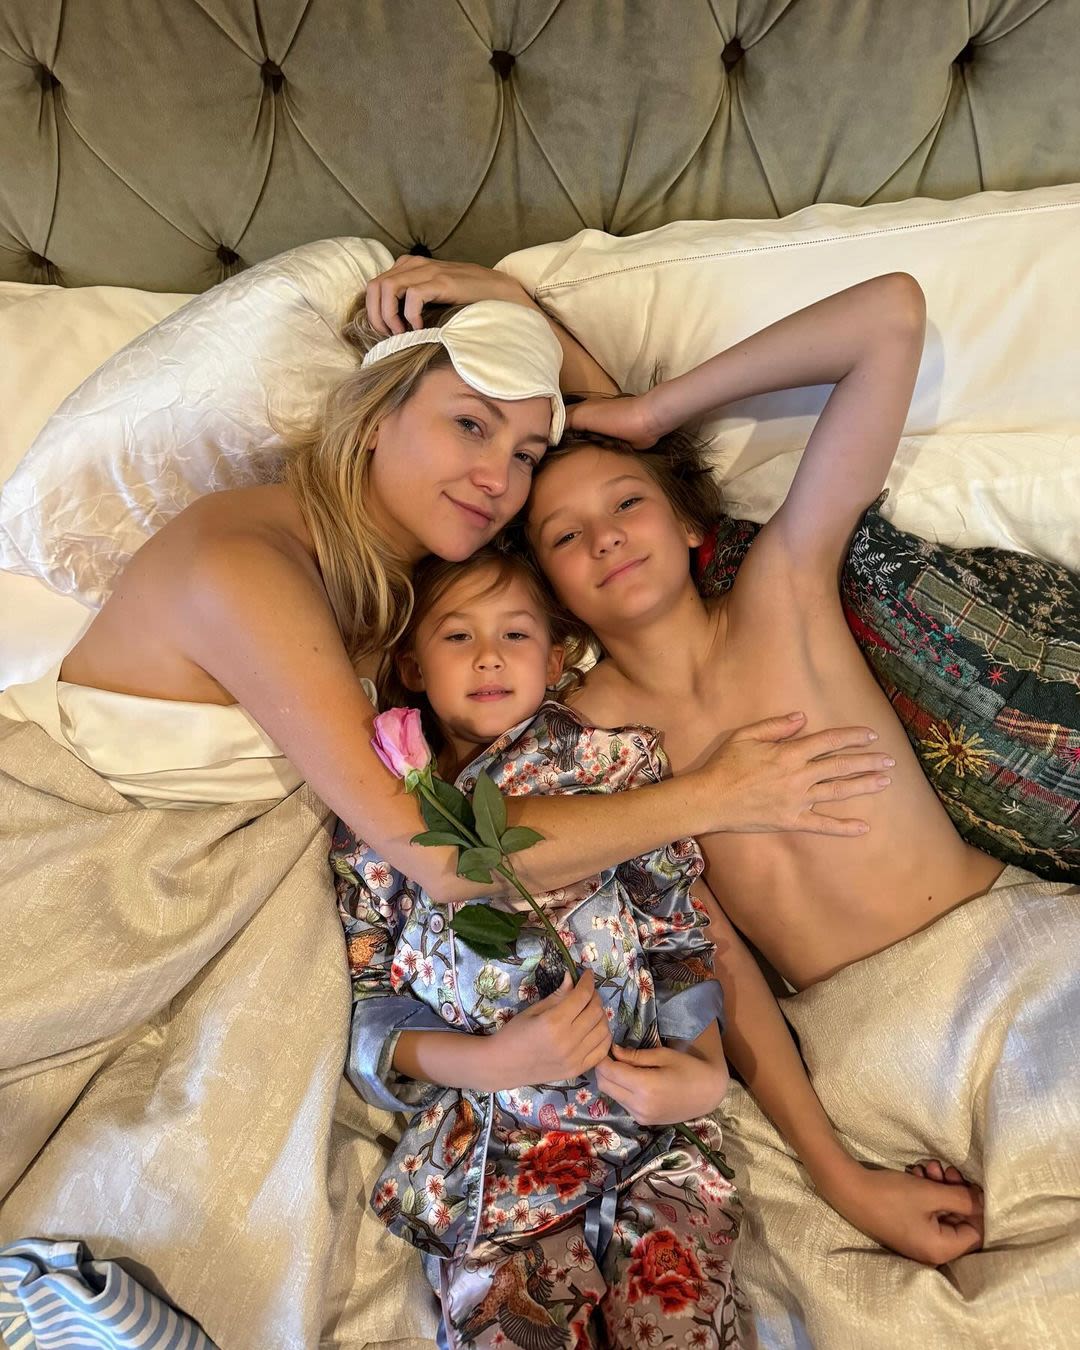 Kate Hudson Shares Rare Photos of Son Bingham on Vacation and Fans Think He Looks Like River Phoenix